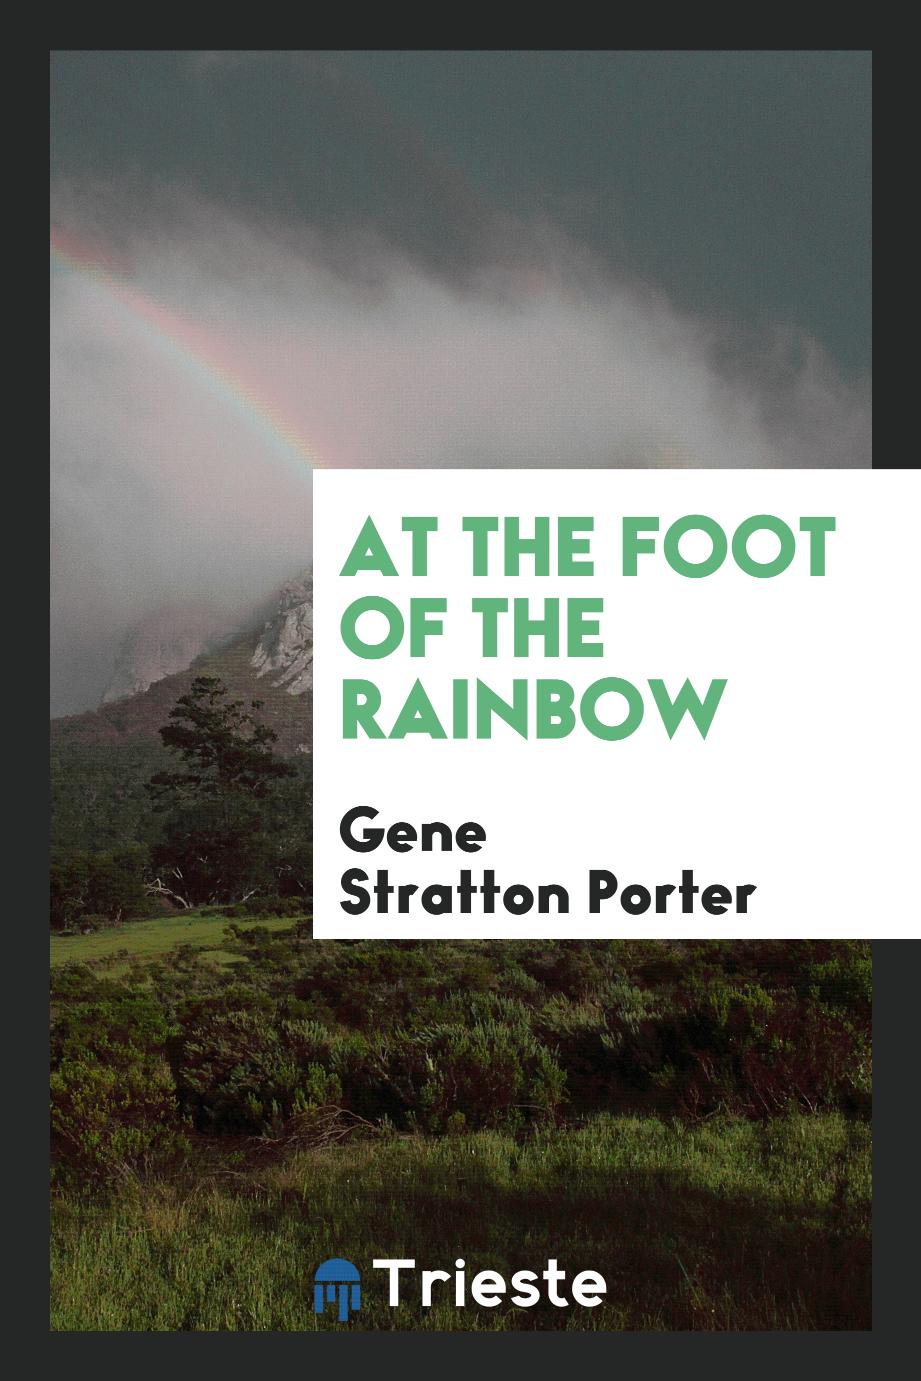 At the foot of the rainbow